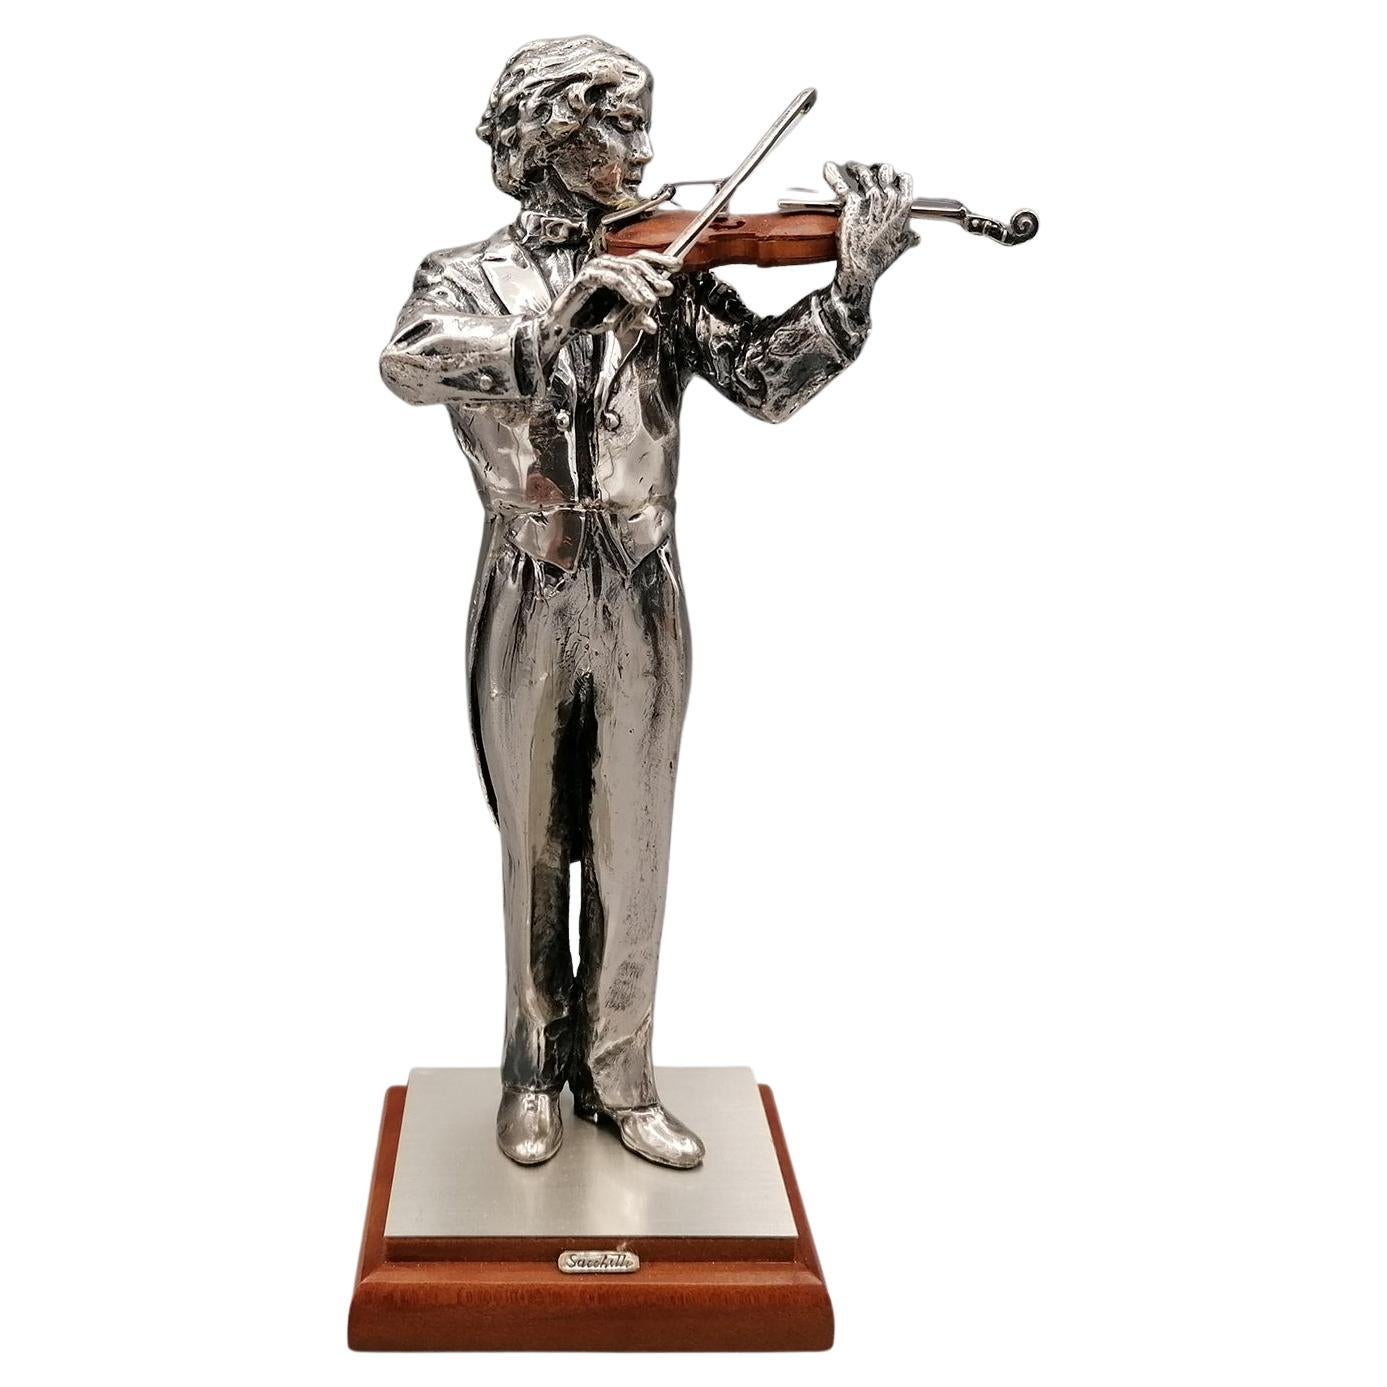 2oth Century Italian Solid Silver Violinist statue with wooden violin